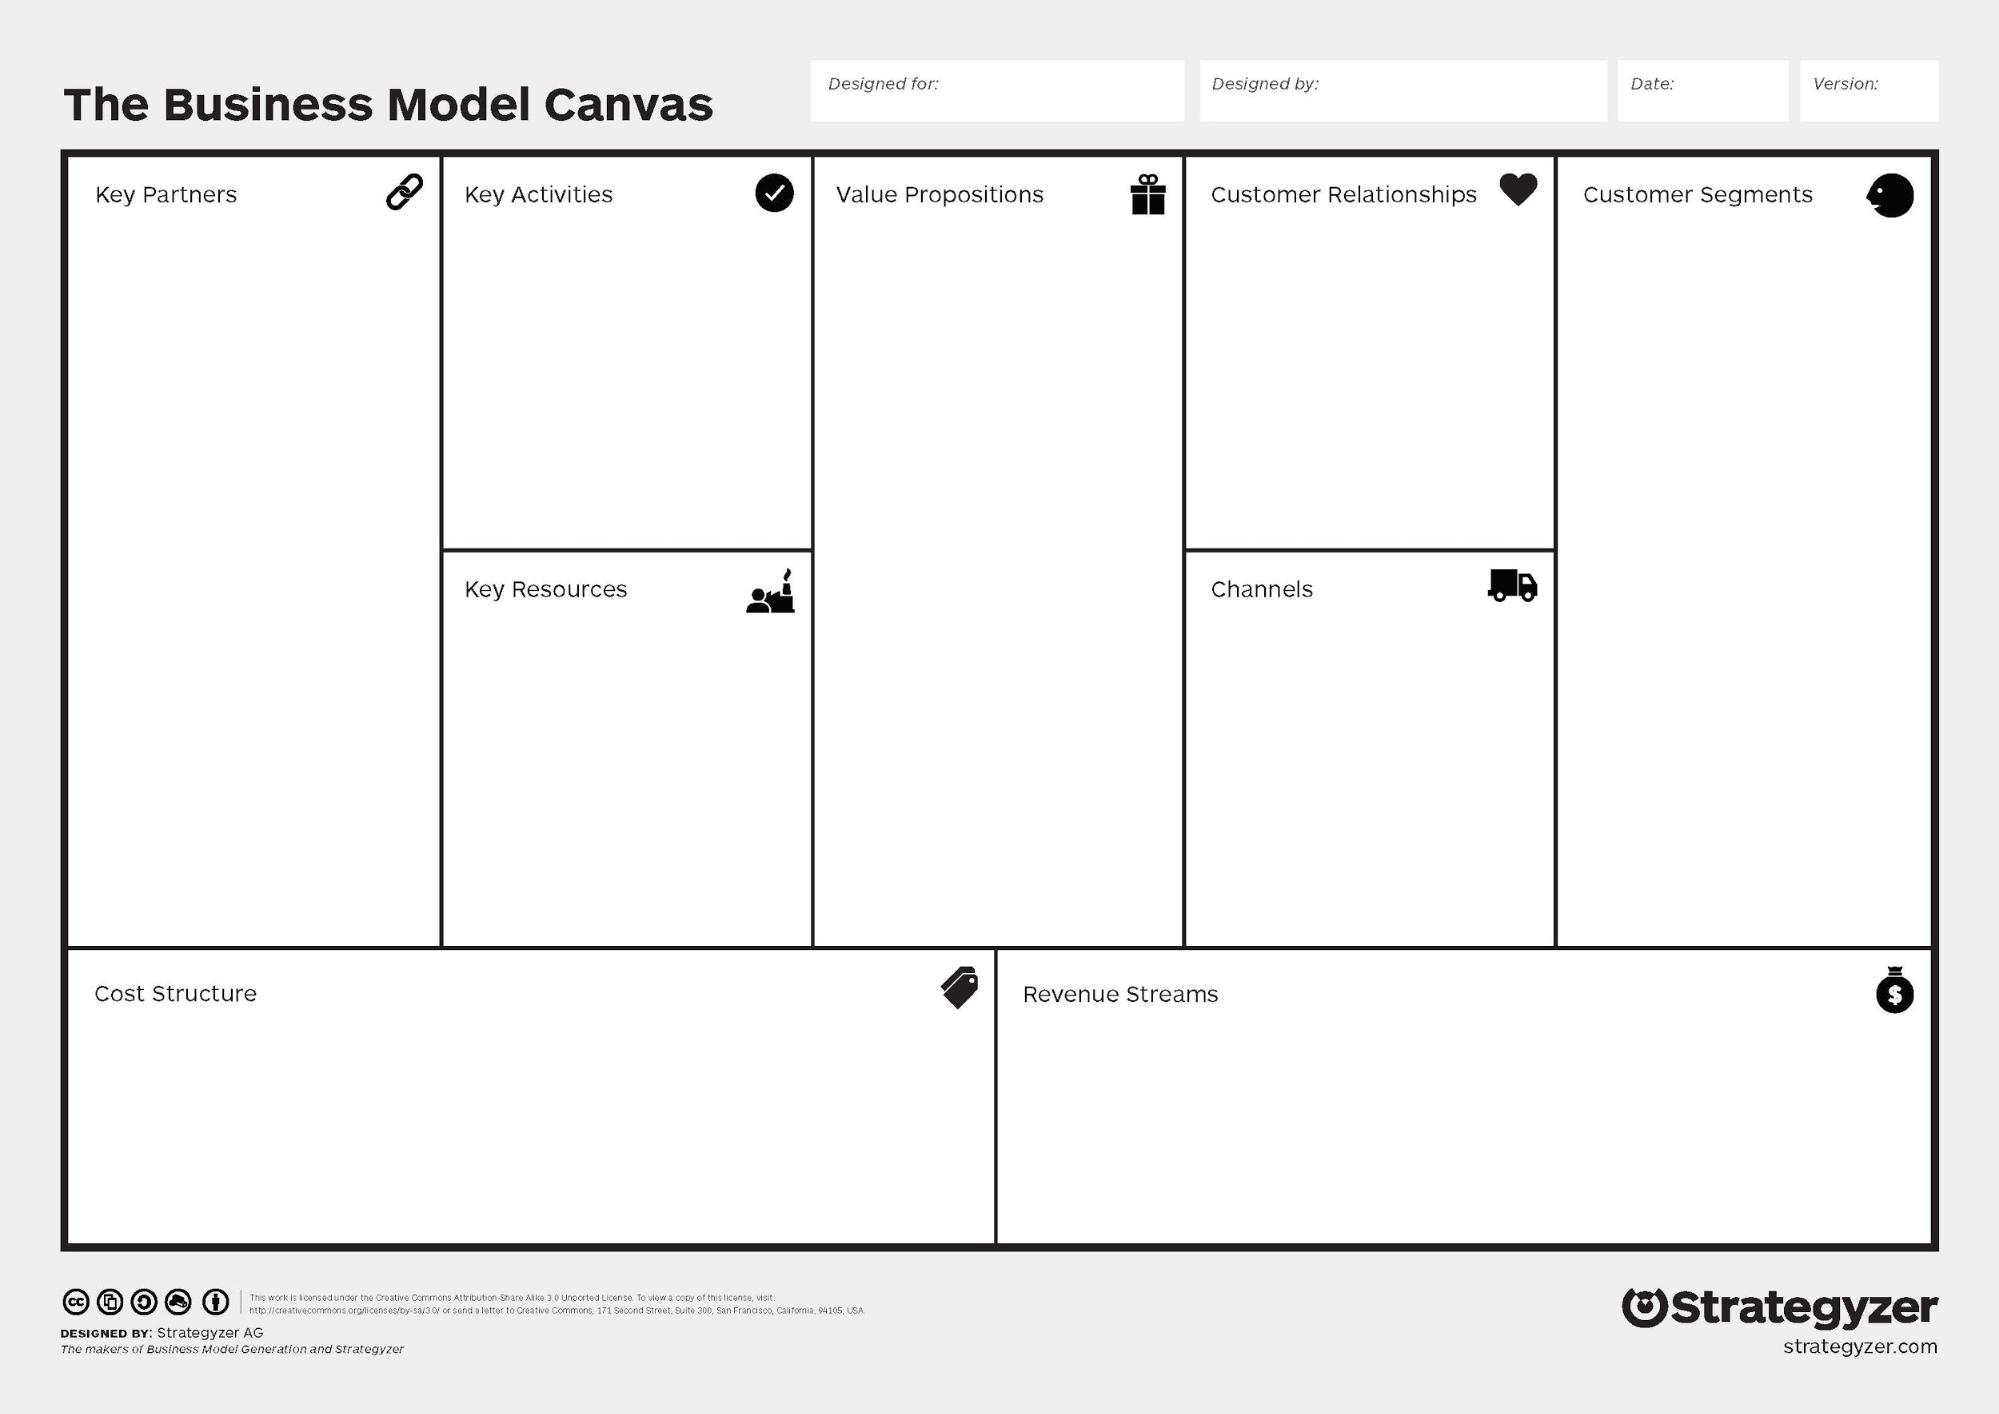 The Business Model Canvas tool helps you plan and map out different elements of a business model. This canvas contains the following elements: Key Partners, Key Activities, Key Resources, Value Propositions, Customer Relationships, Channels, Customer Segments, Cost Structure, and Revenue Streams. This image is linked to a video that fully explains how this particular canvas works. You can access the video to hear an audio description of the canvas at https://www.youtube.com/watch?time_continue=2&v=QoAOzMTLP5s